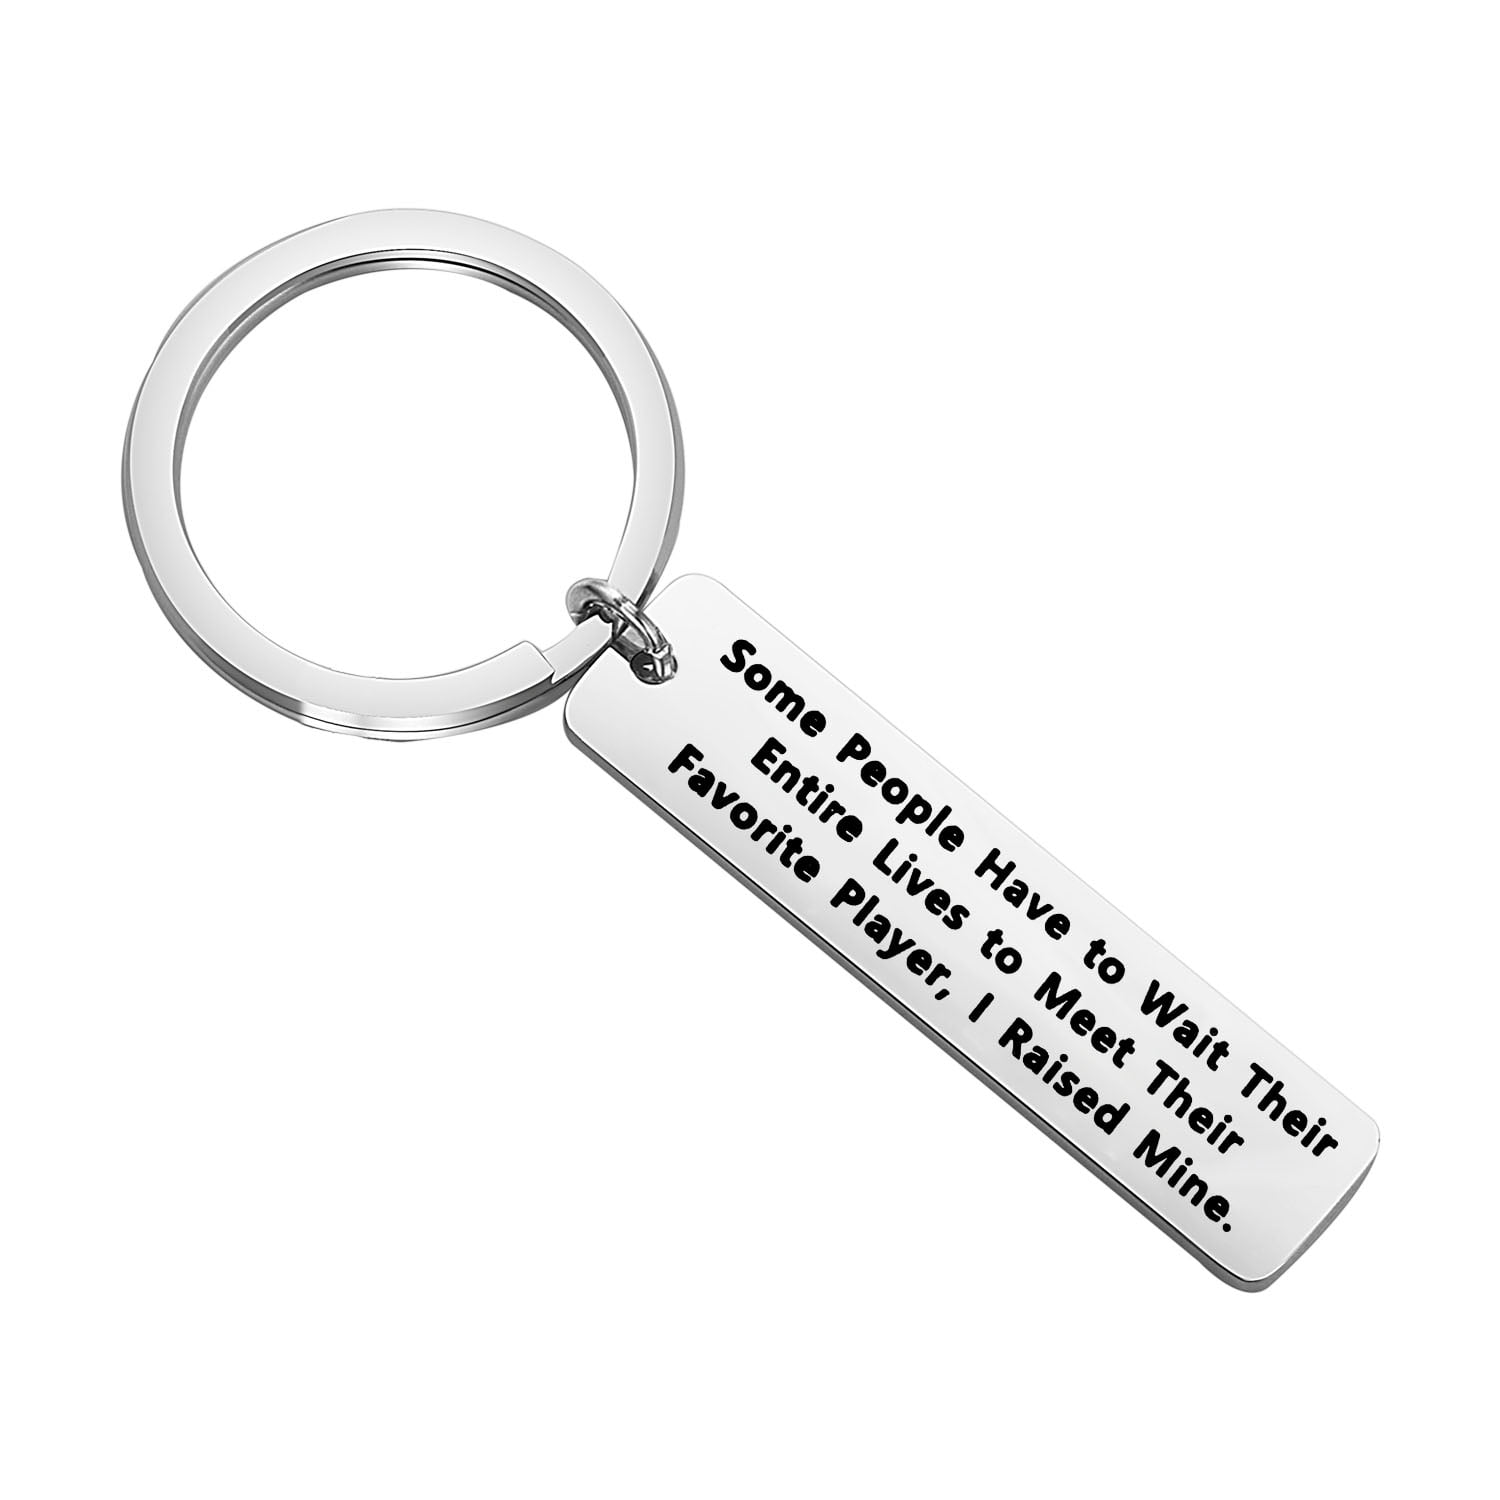 Baseball Keychain Coach Thank You Gifts for Men Women Sports Coaches Coworker Going Away Christmas Birthday Gifts for Him Her Team Leader Boss Retirement Great Coach Appreciation Gift 